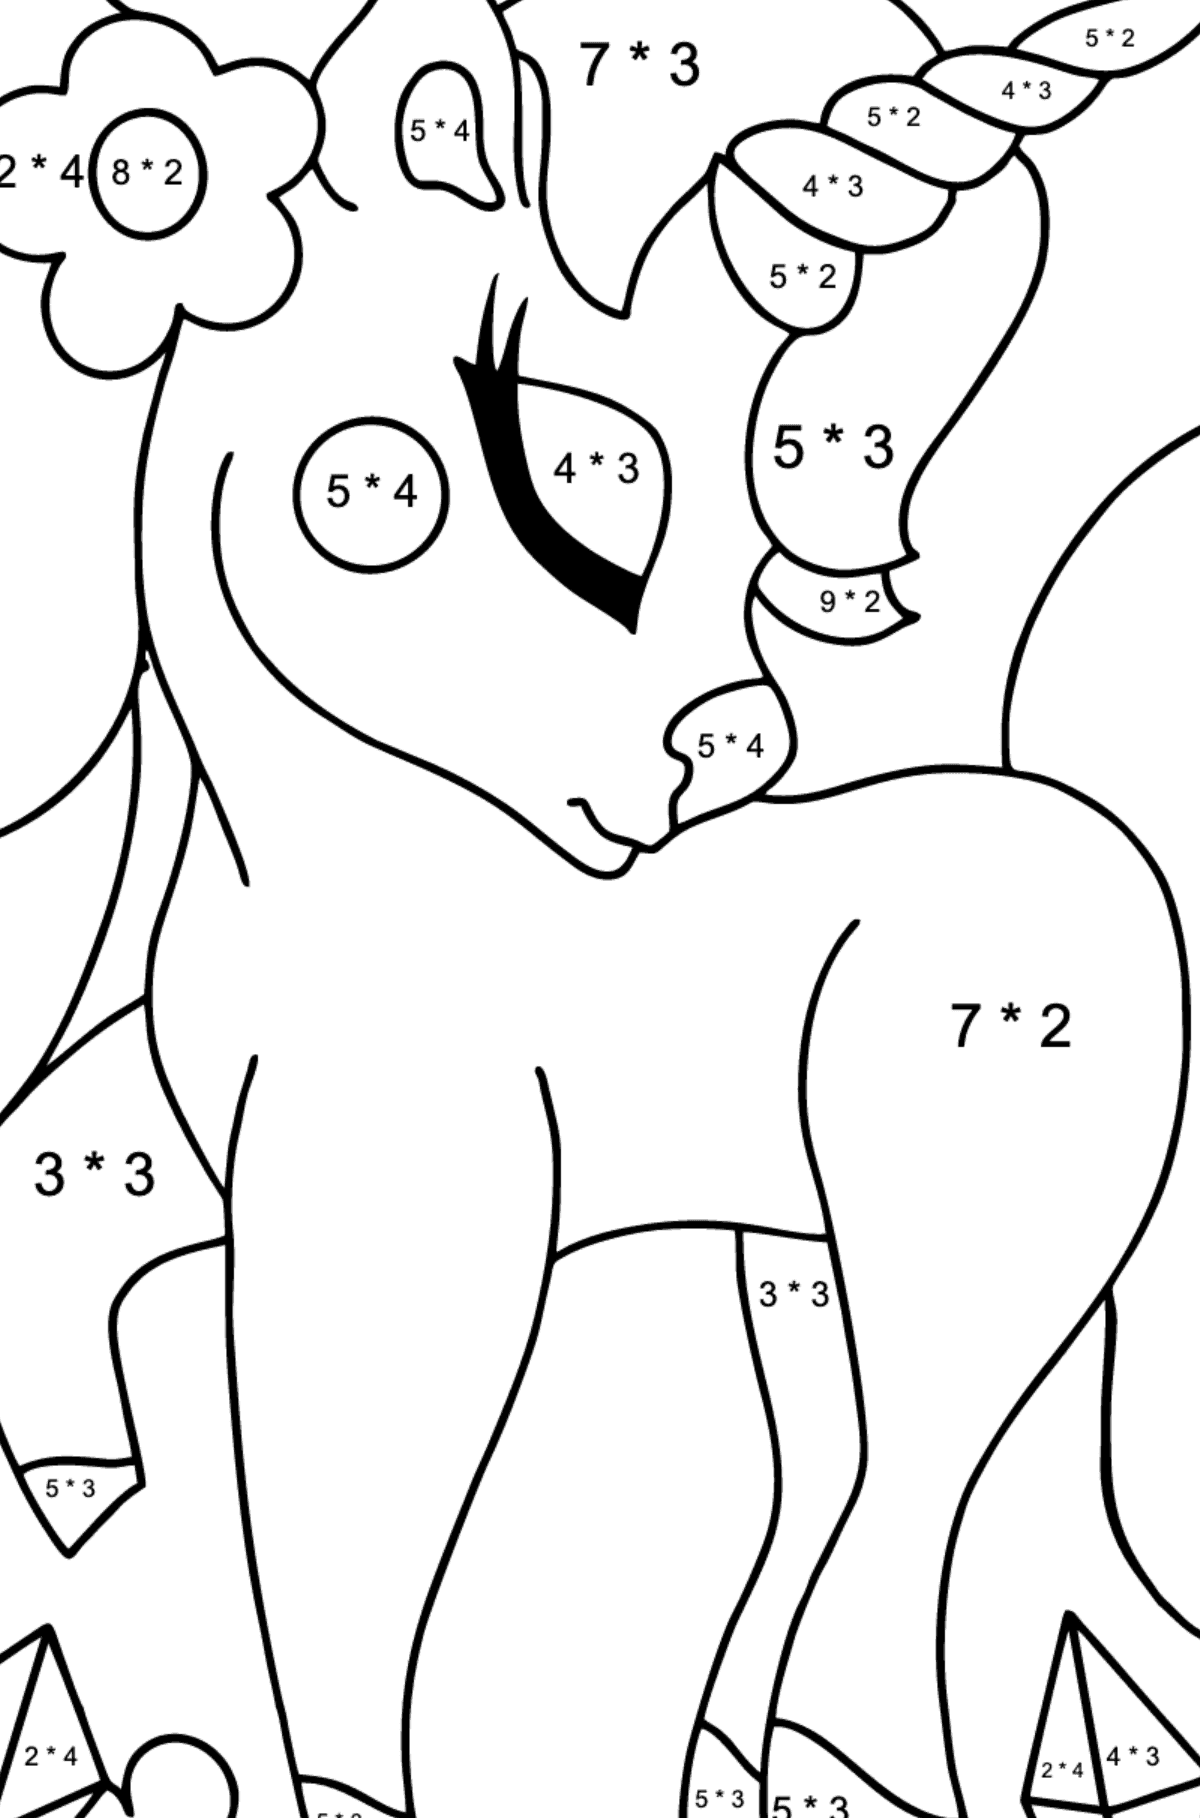 Charming Unicorn Coloring Page - Math Coloring - Multiplication for Kids